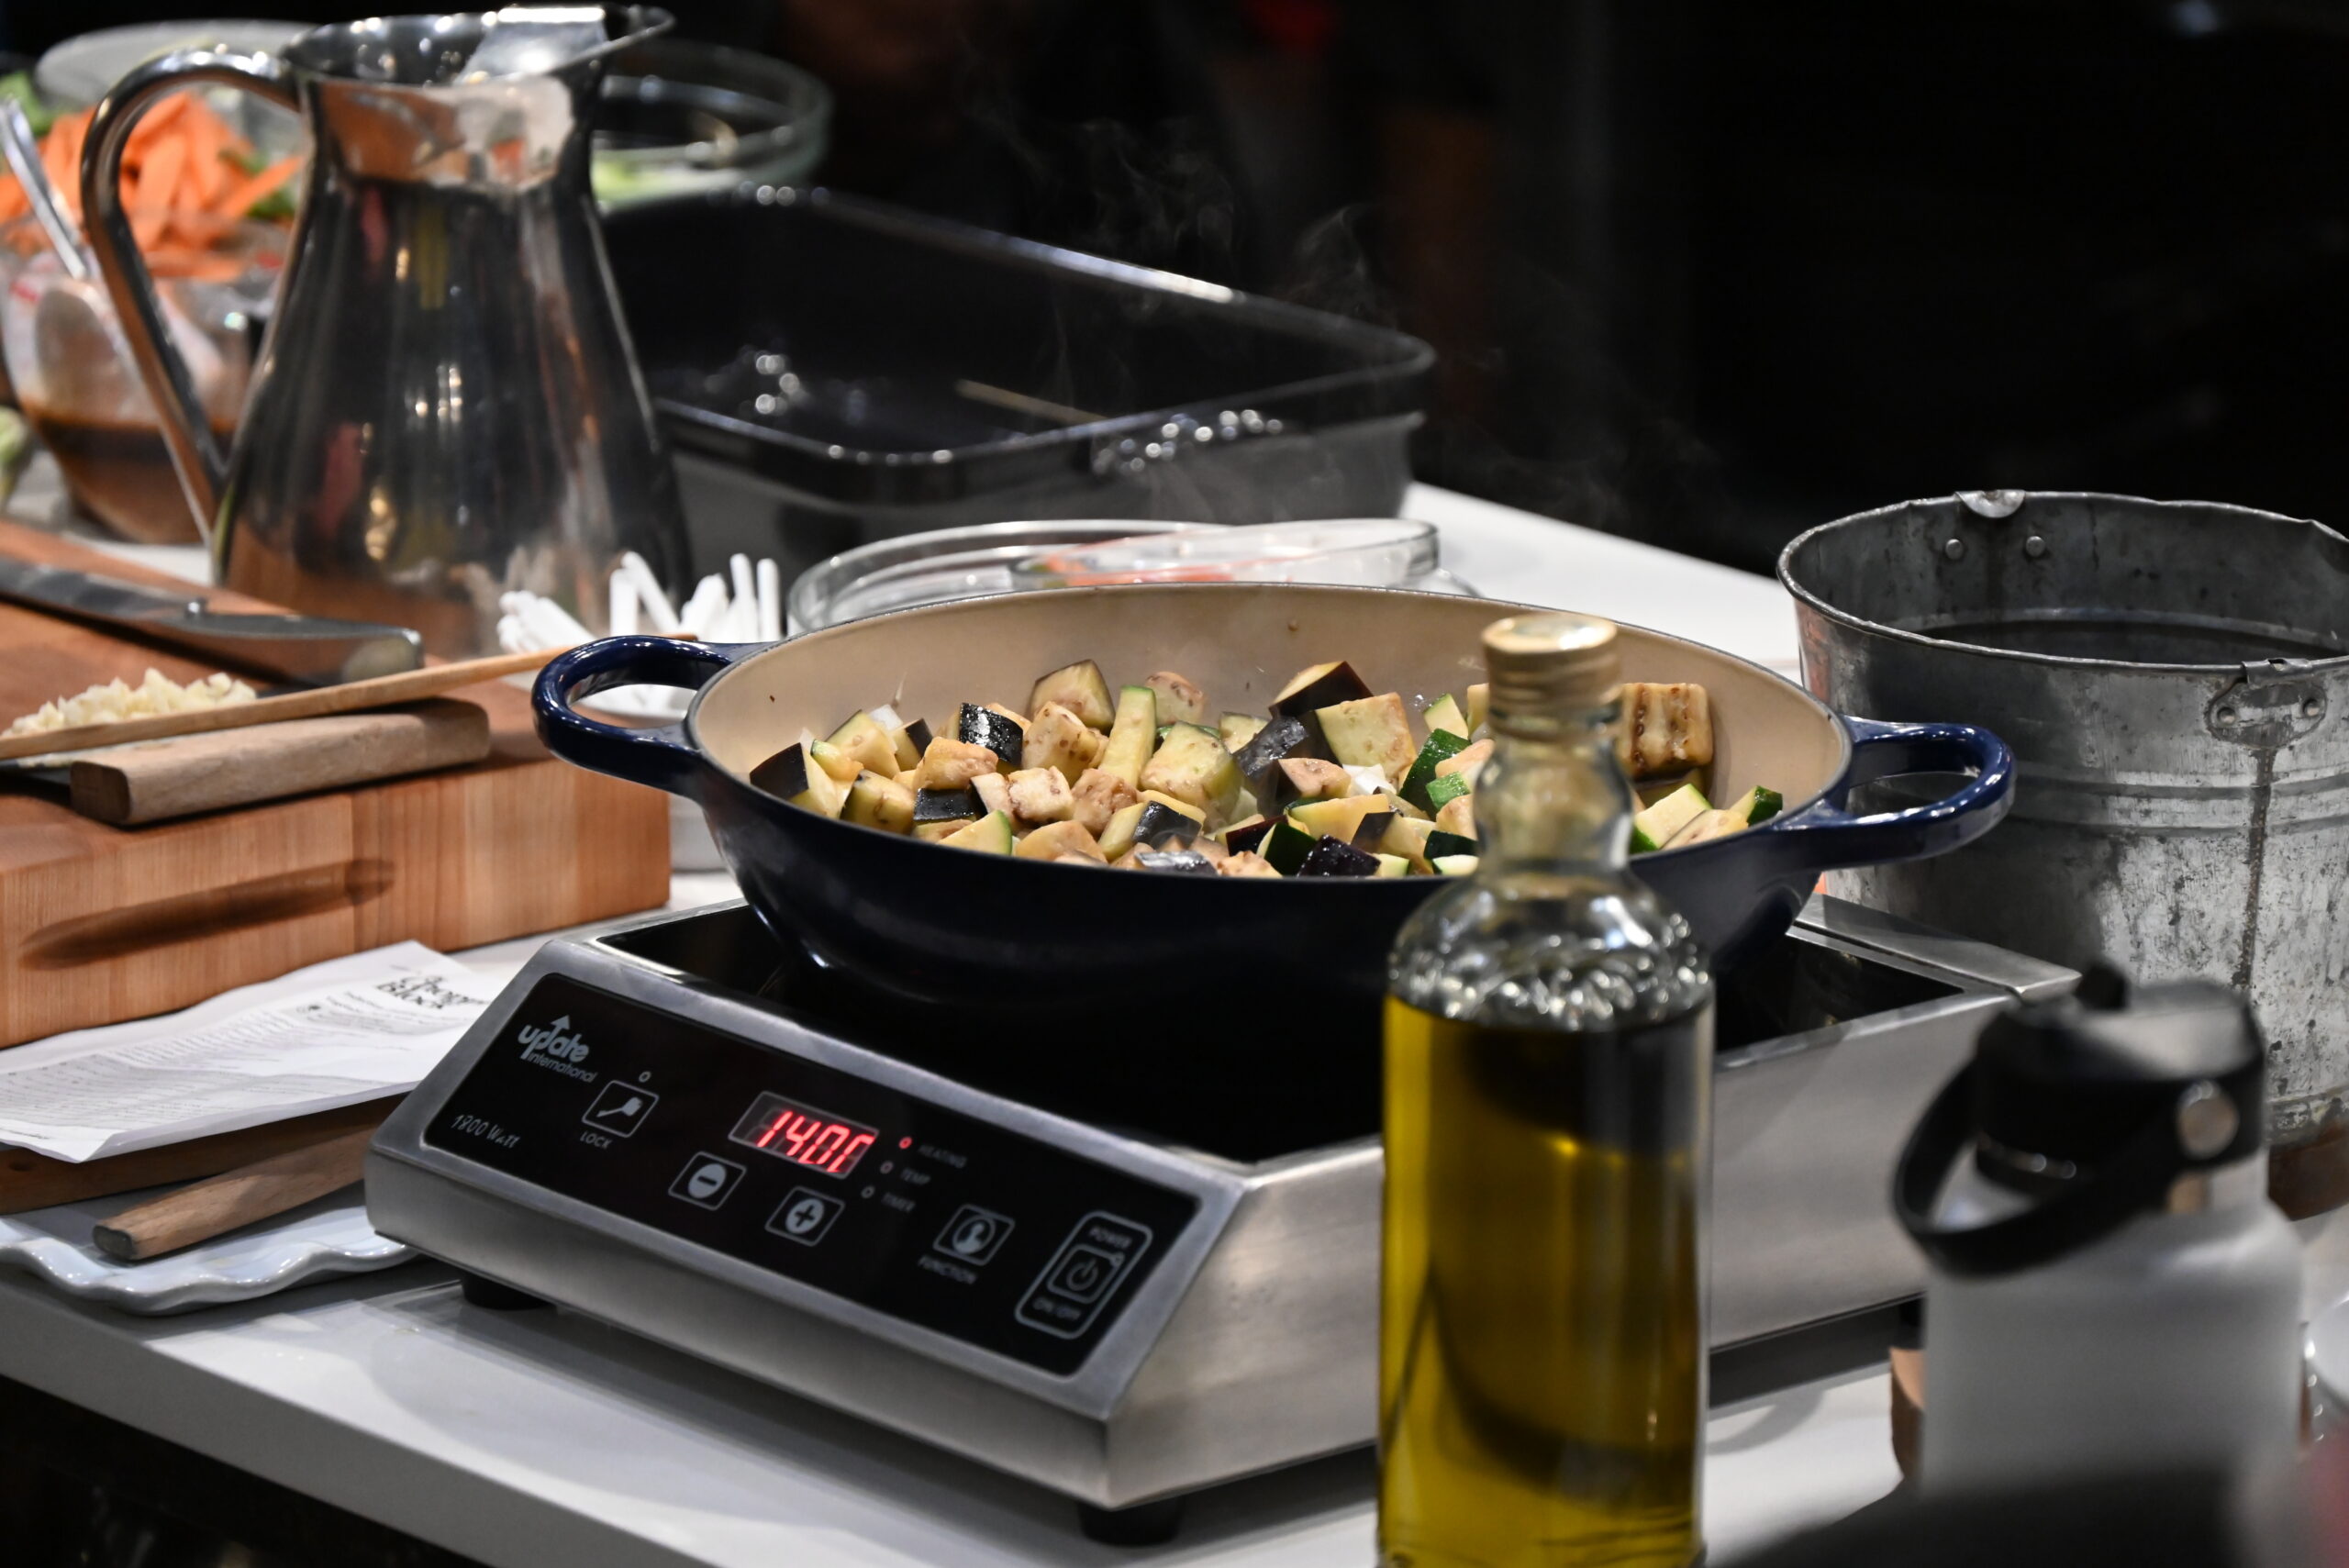 Induction Stove Cookin’: Sustainability in the Kitchen